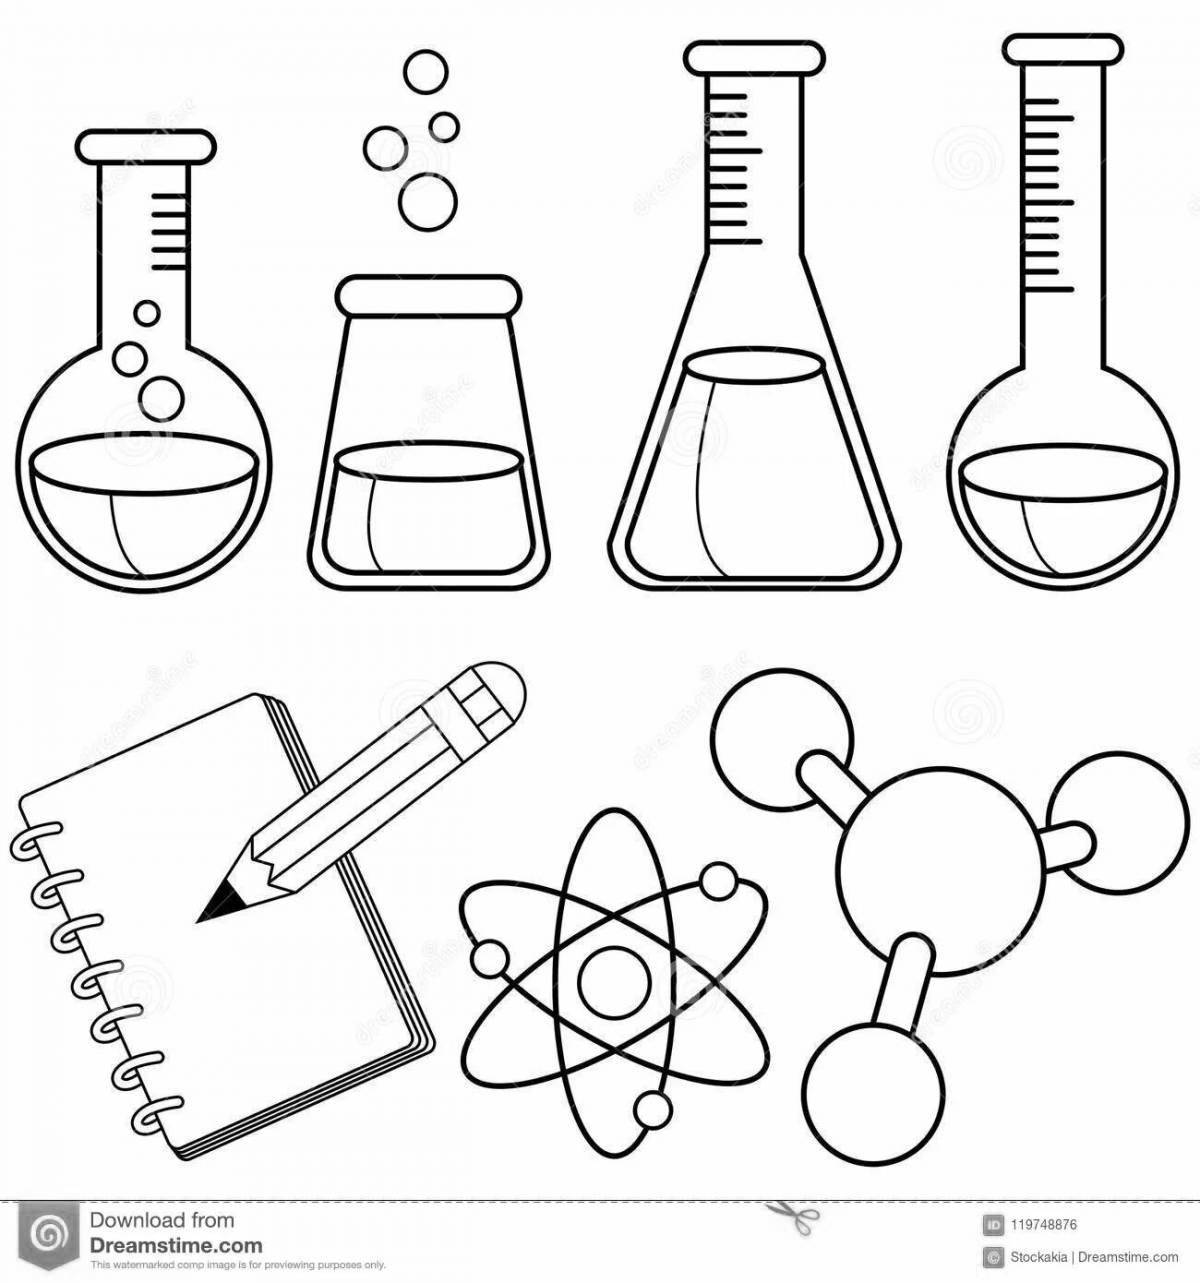 Grand chemical flasks coloring book